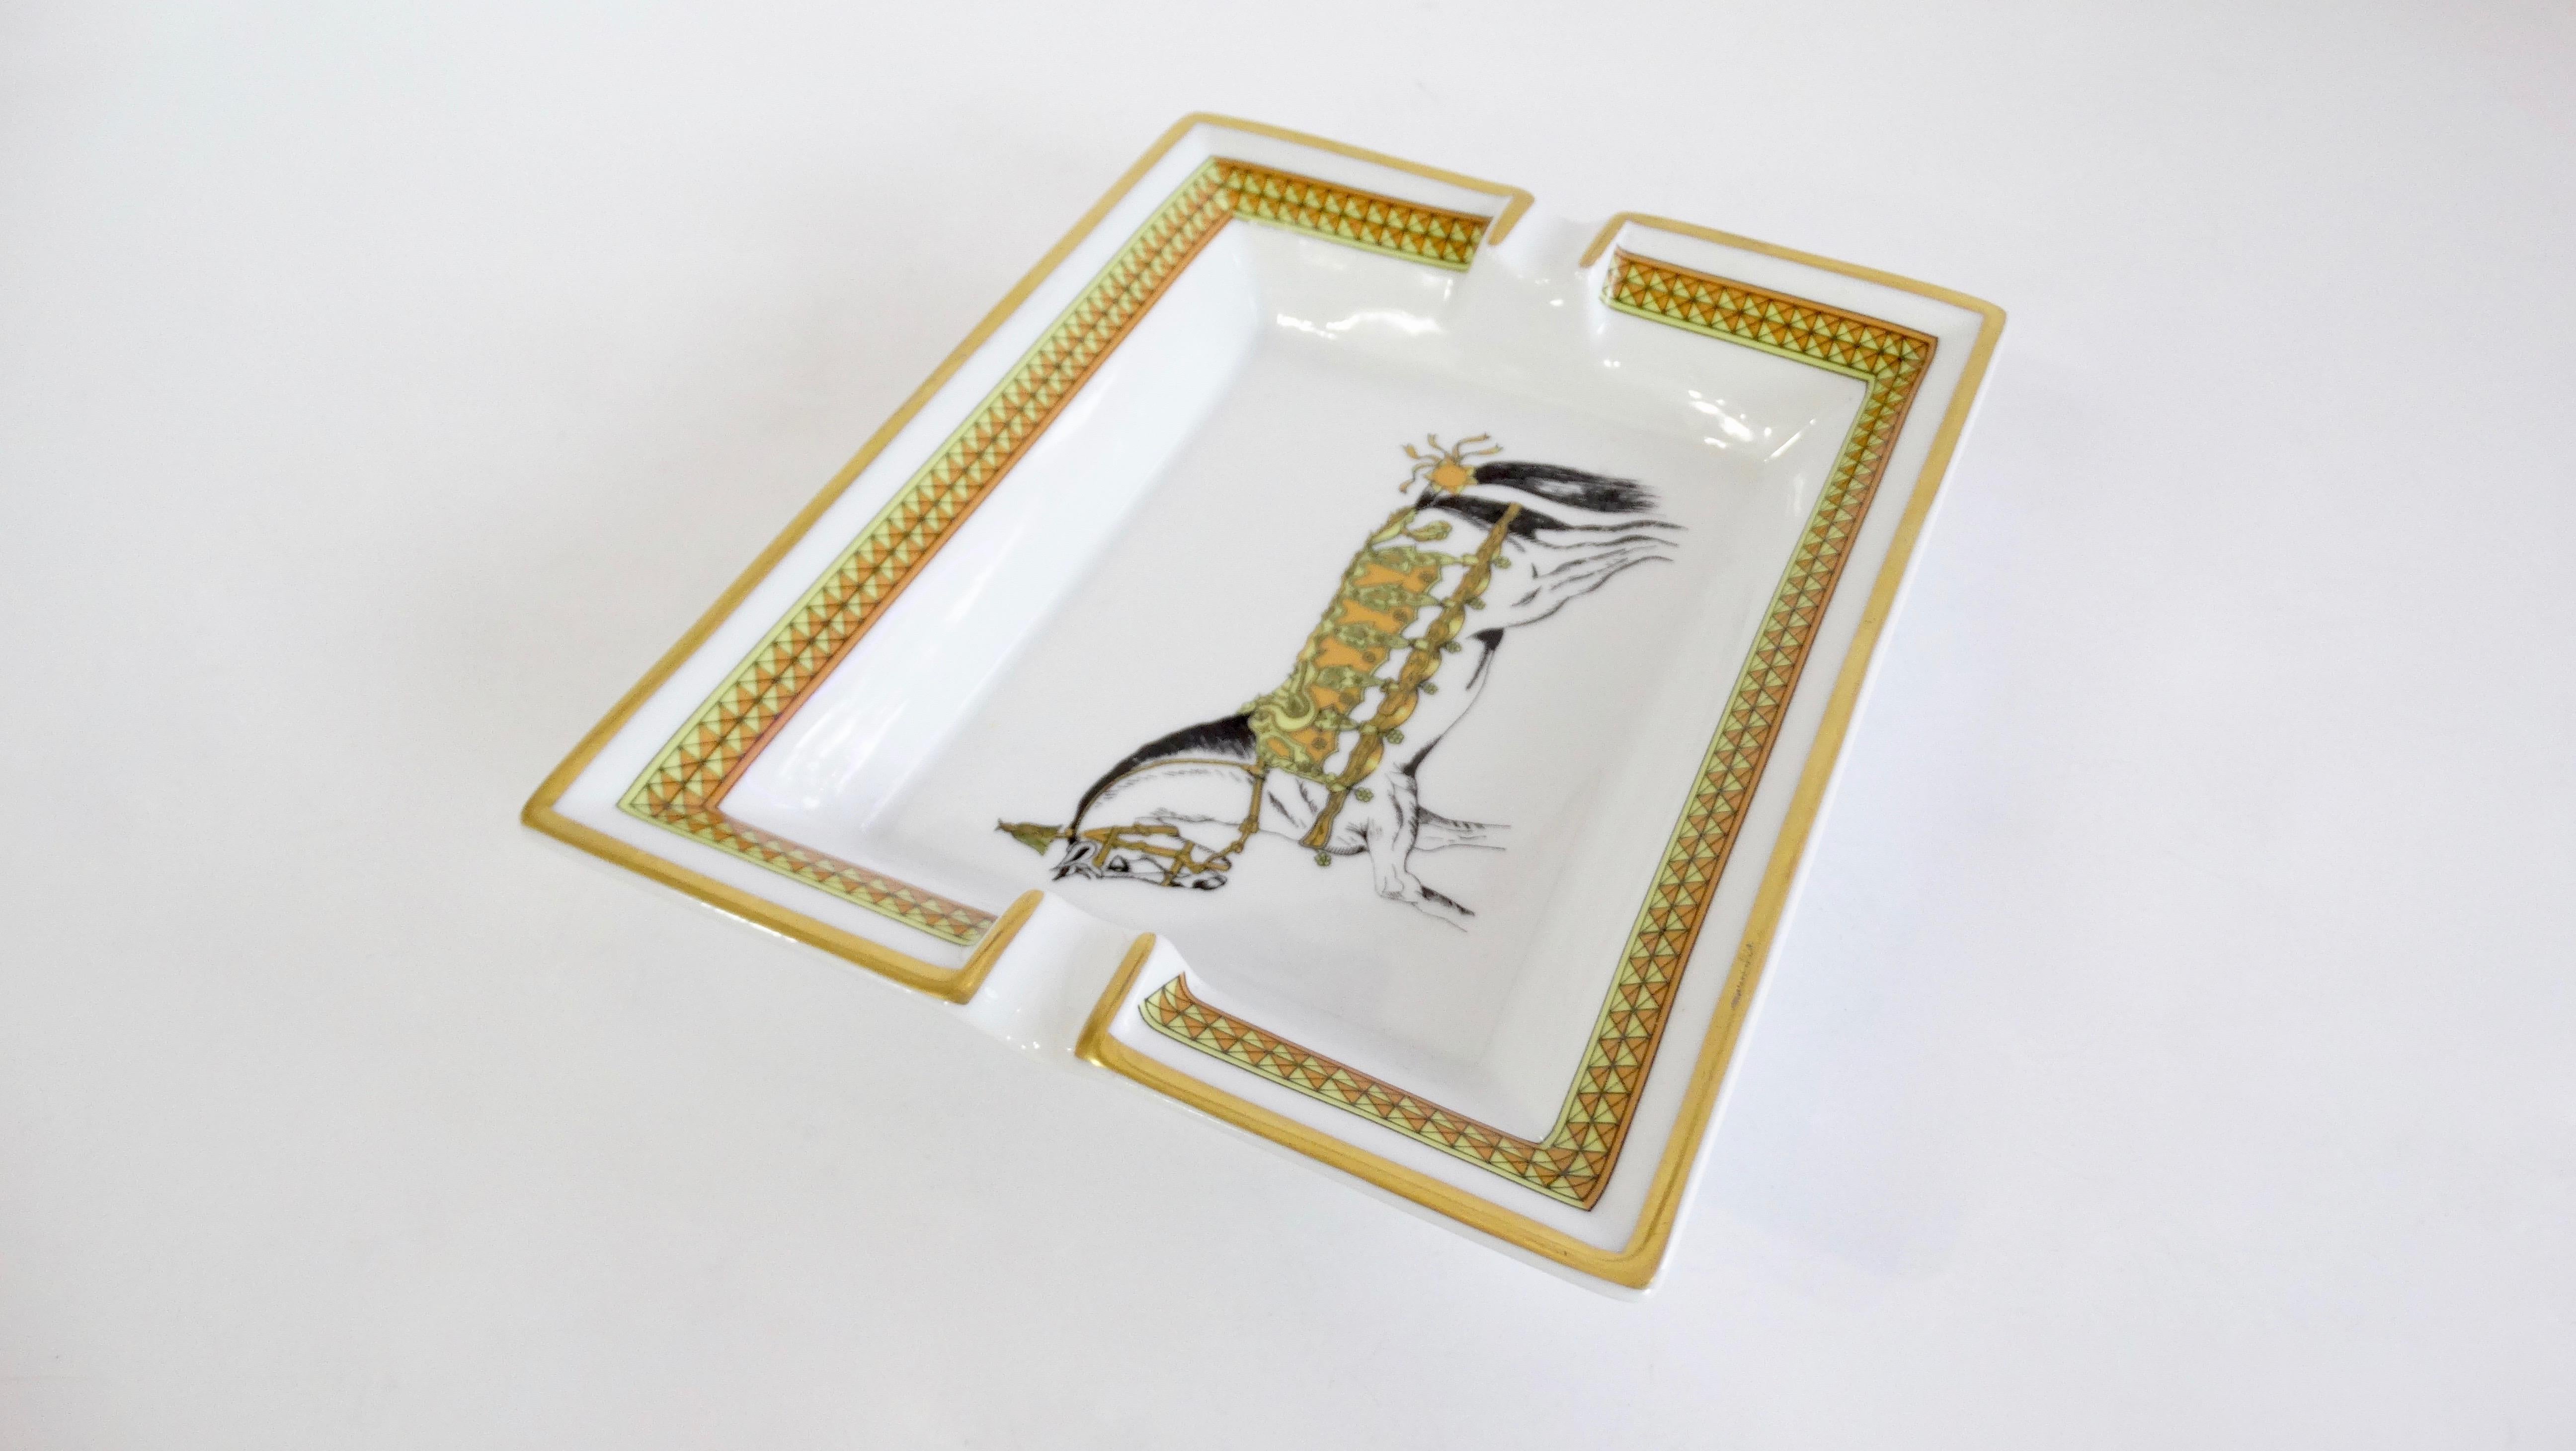 Decorate in style with this amazing Hermés tray! Circa 2000s, this tray is crafted from porcelain and features a decorated cheval horse. Trim is painted in metallic gold and includes a decorative pattern framing the inside. Use to elevate your cigar